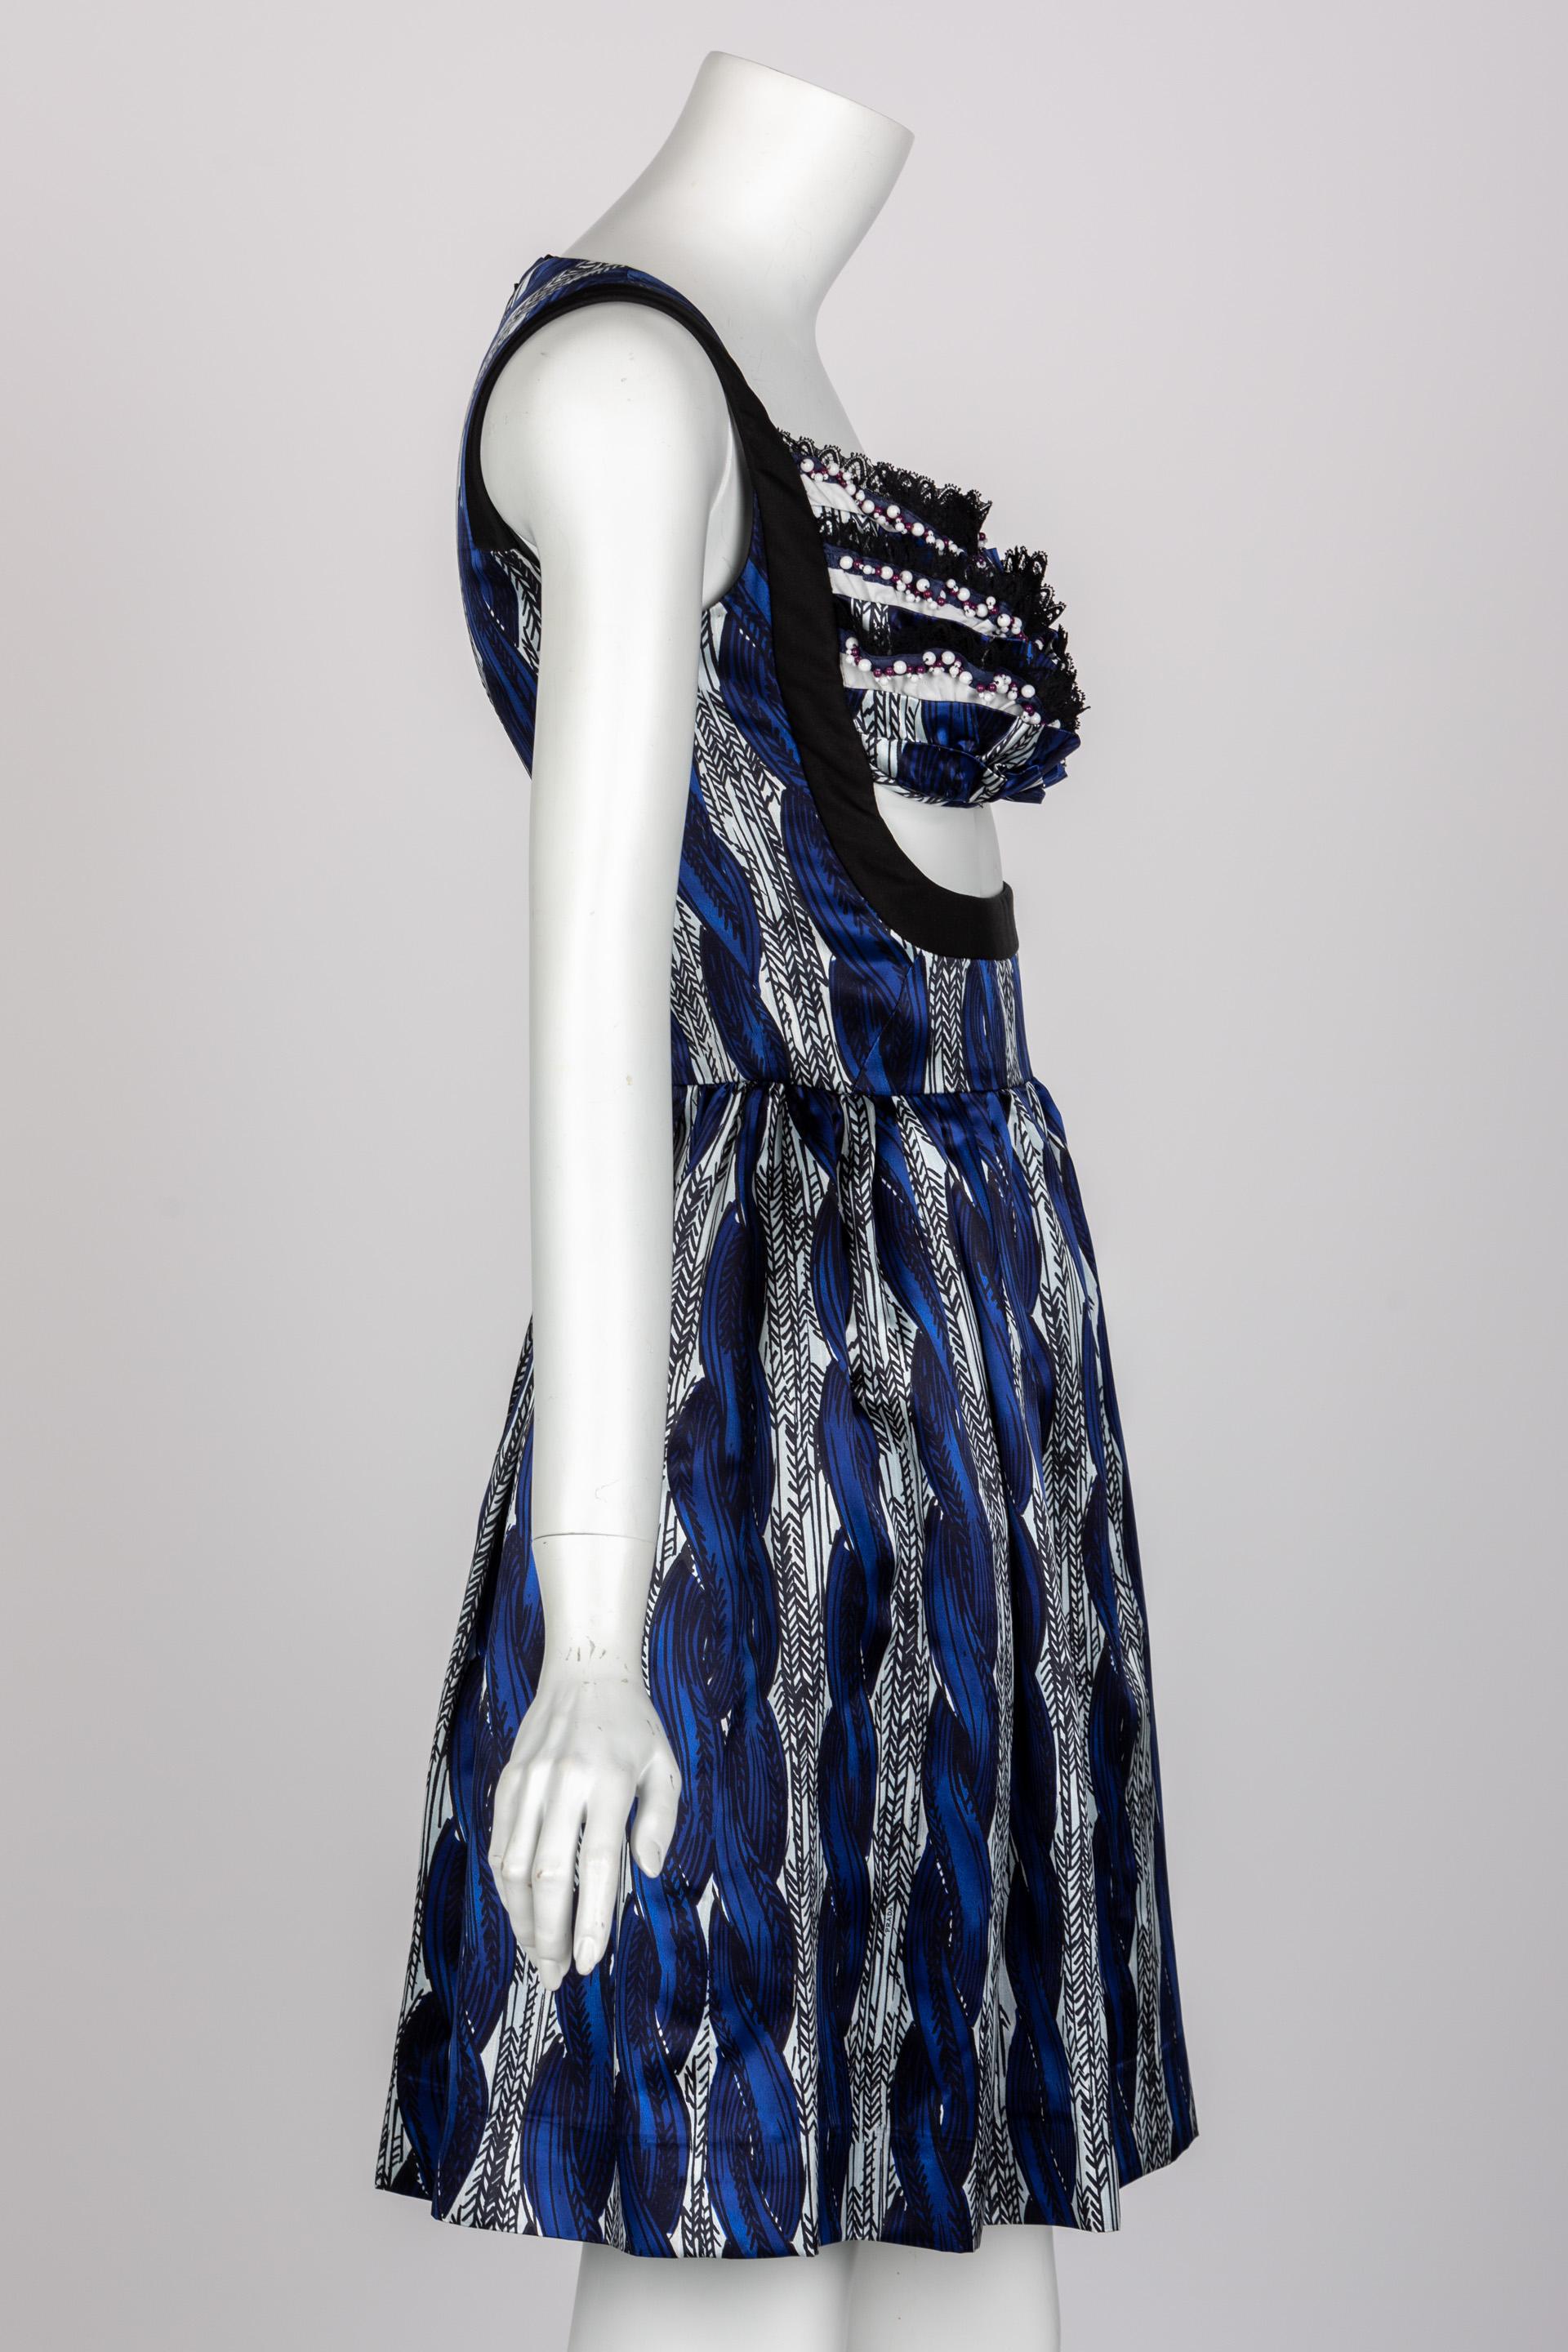 Prada Silk Cable Knit Blue Black Printed Cut Out Dress Runway Fall 2010 In Excellent Condition In Boca Raton, FL